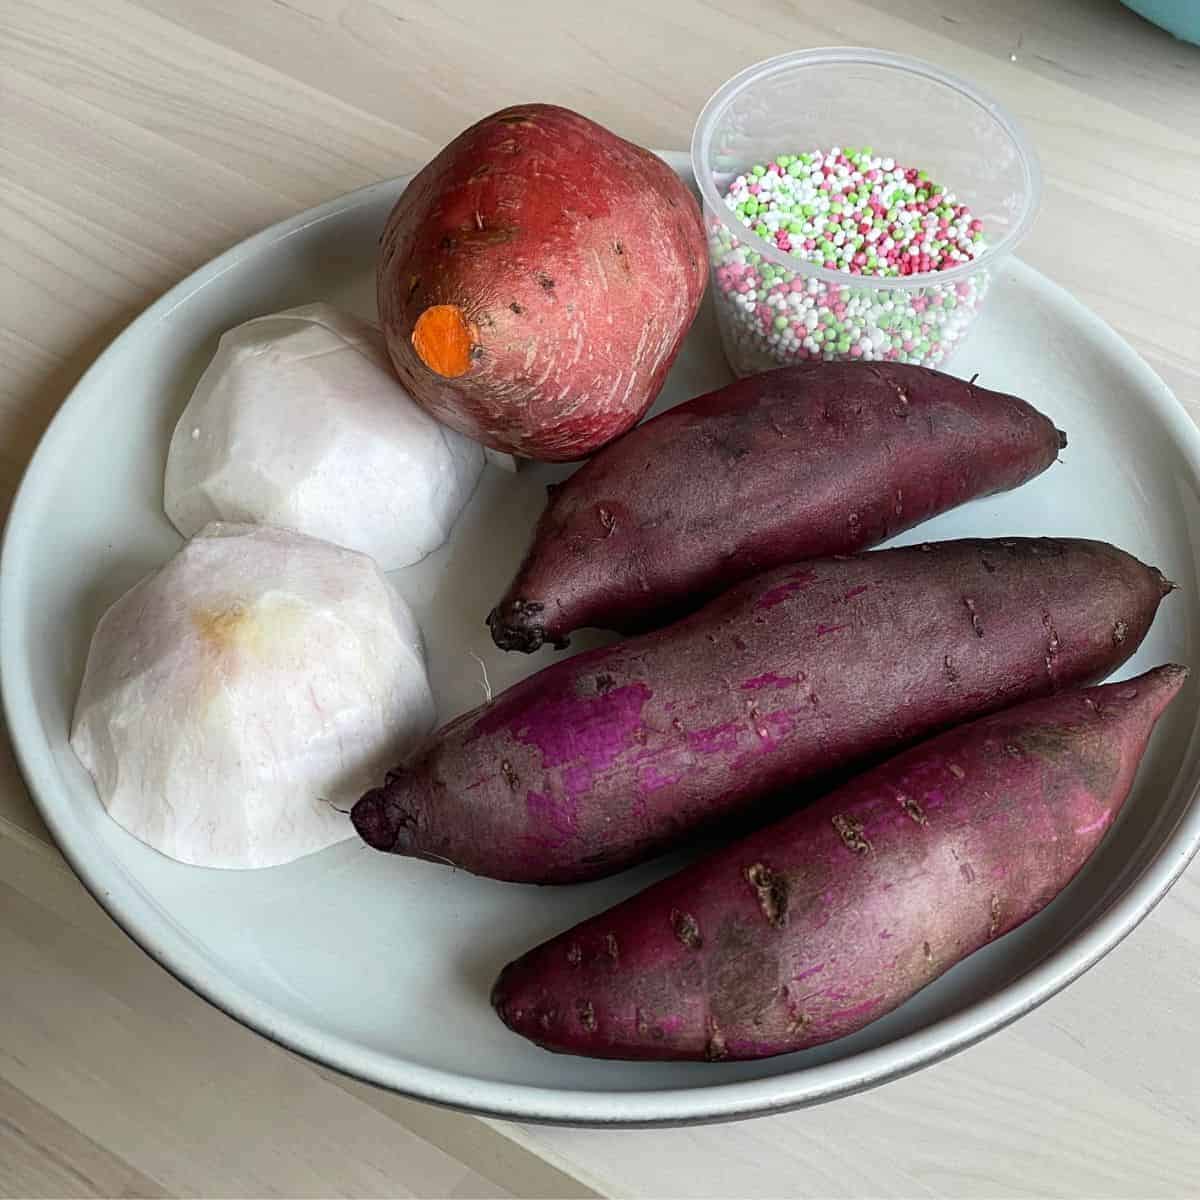 three types of tubers and sago